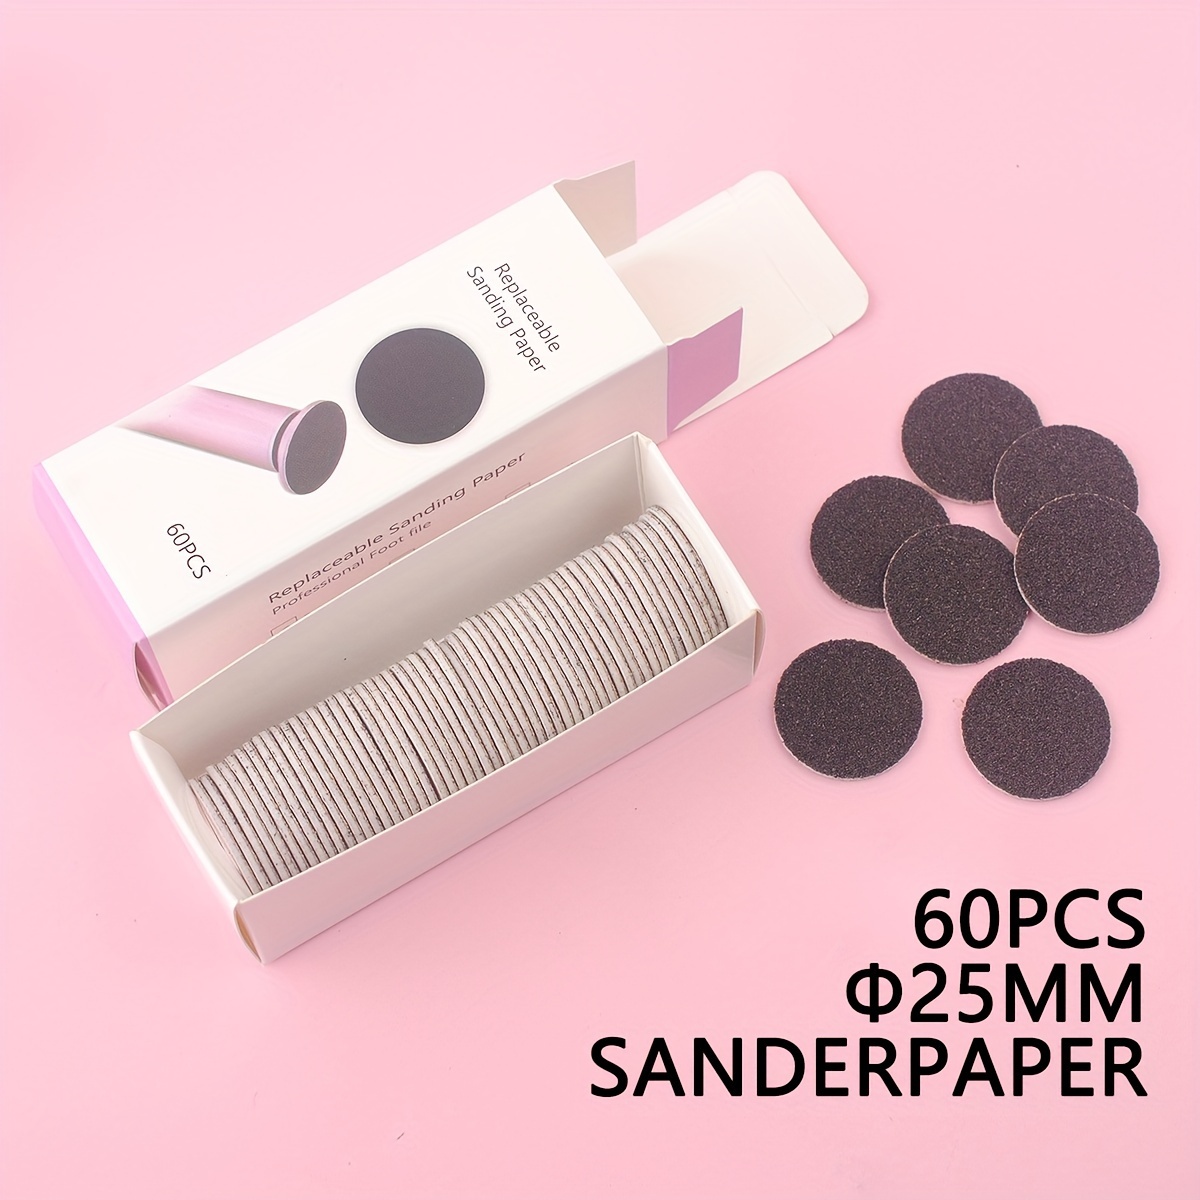 

60-piece 25mm Hypoallergenic Electric Foot File Sandpaper Discs - Easy Callus & Dead Skin Removal, No Battery Needed